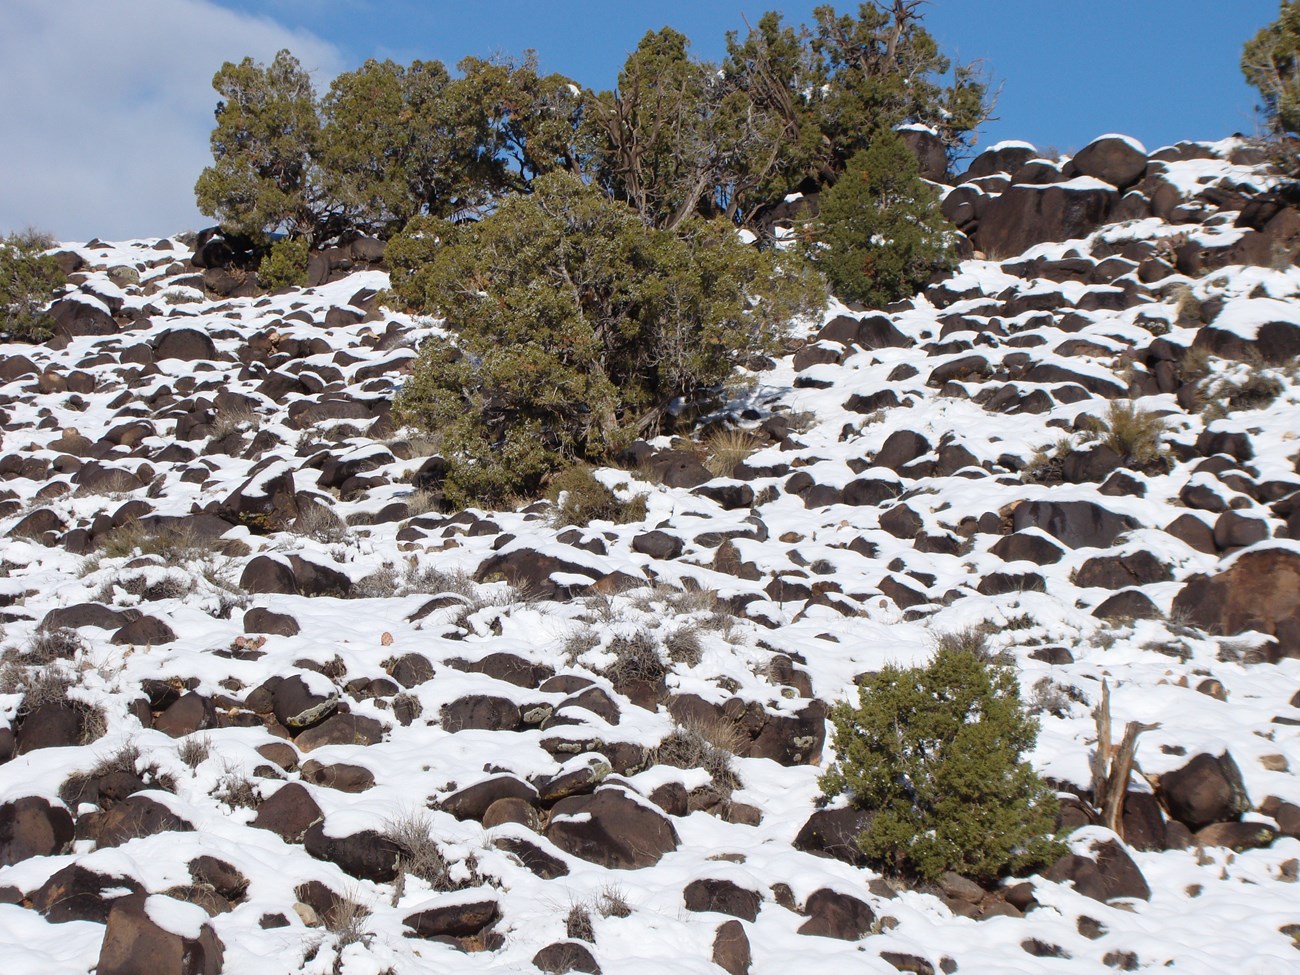 Over 100 black boulders of all sizes scattered on a hillside covered in snow, with the boulders still visible. Some green juniper trees are mixed with the rocks, and blue sky and clouds above.